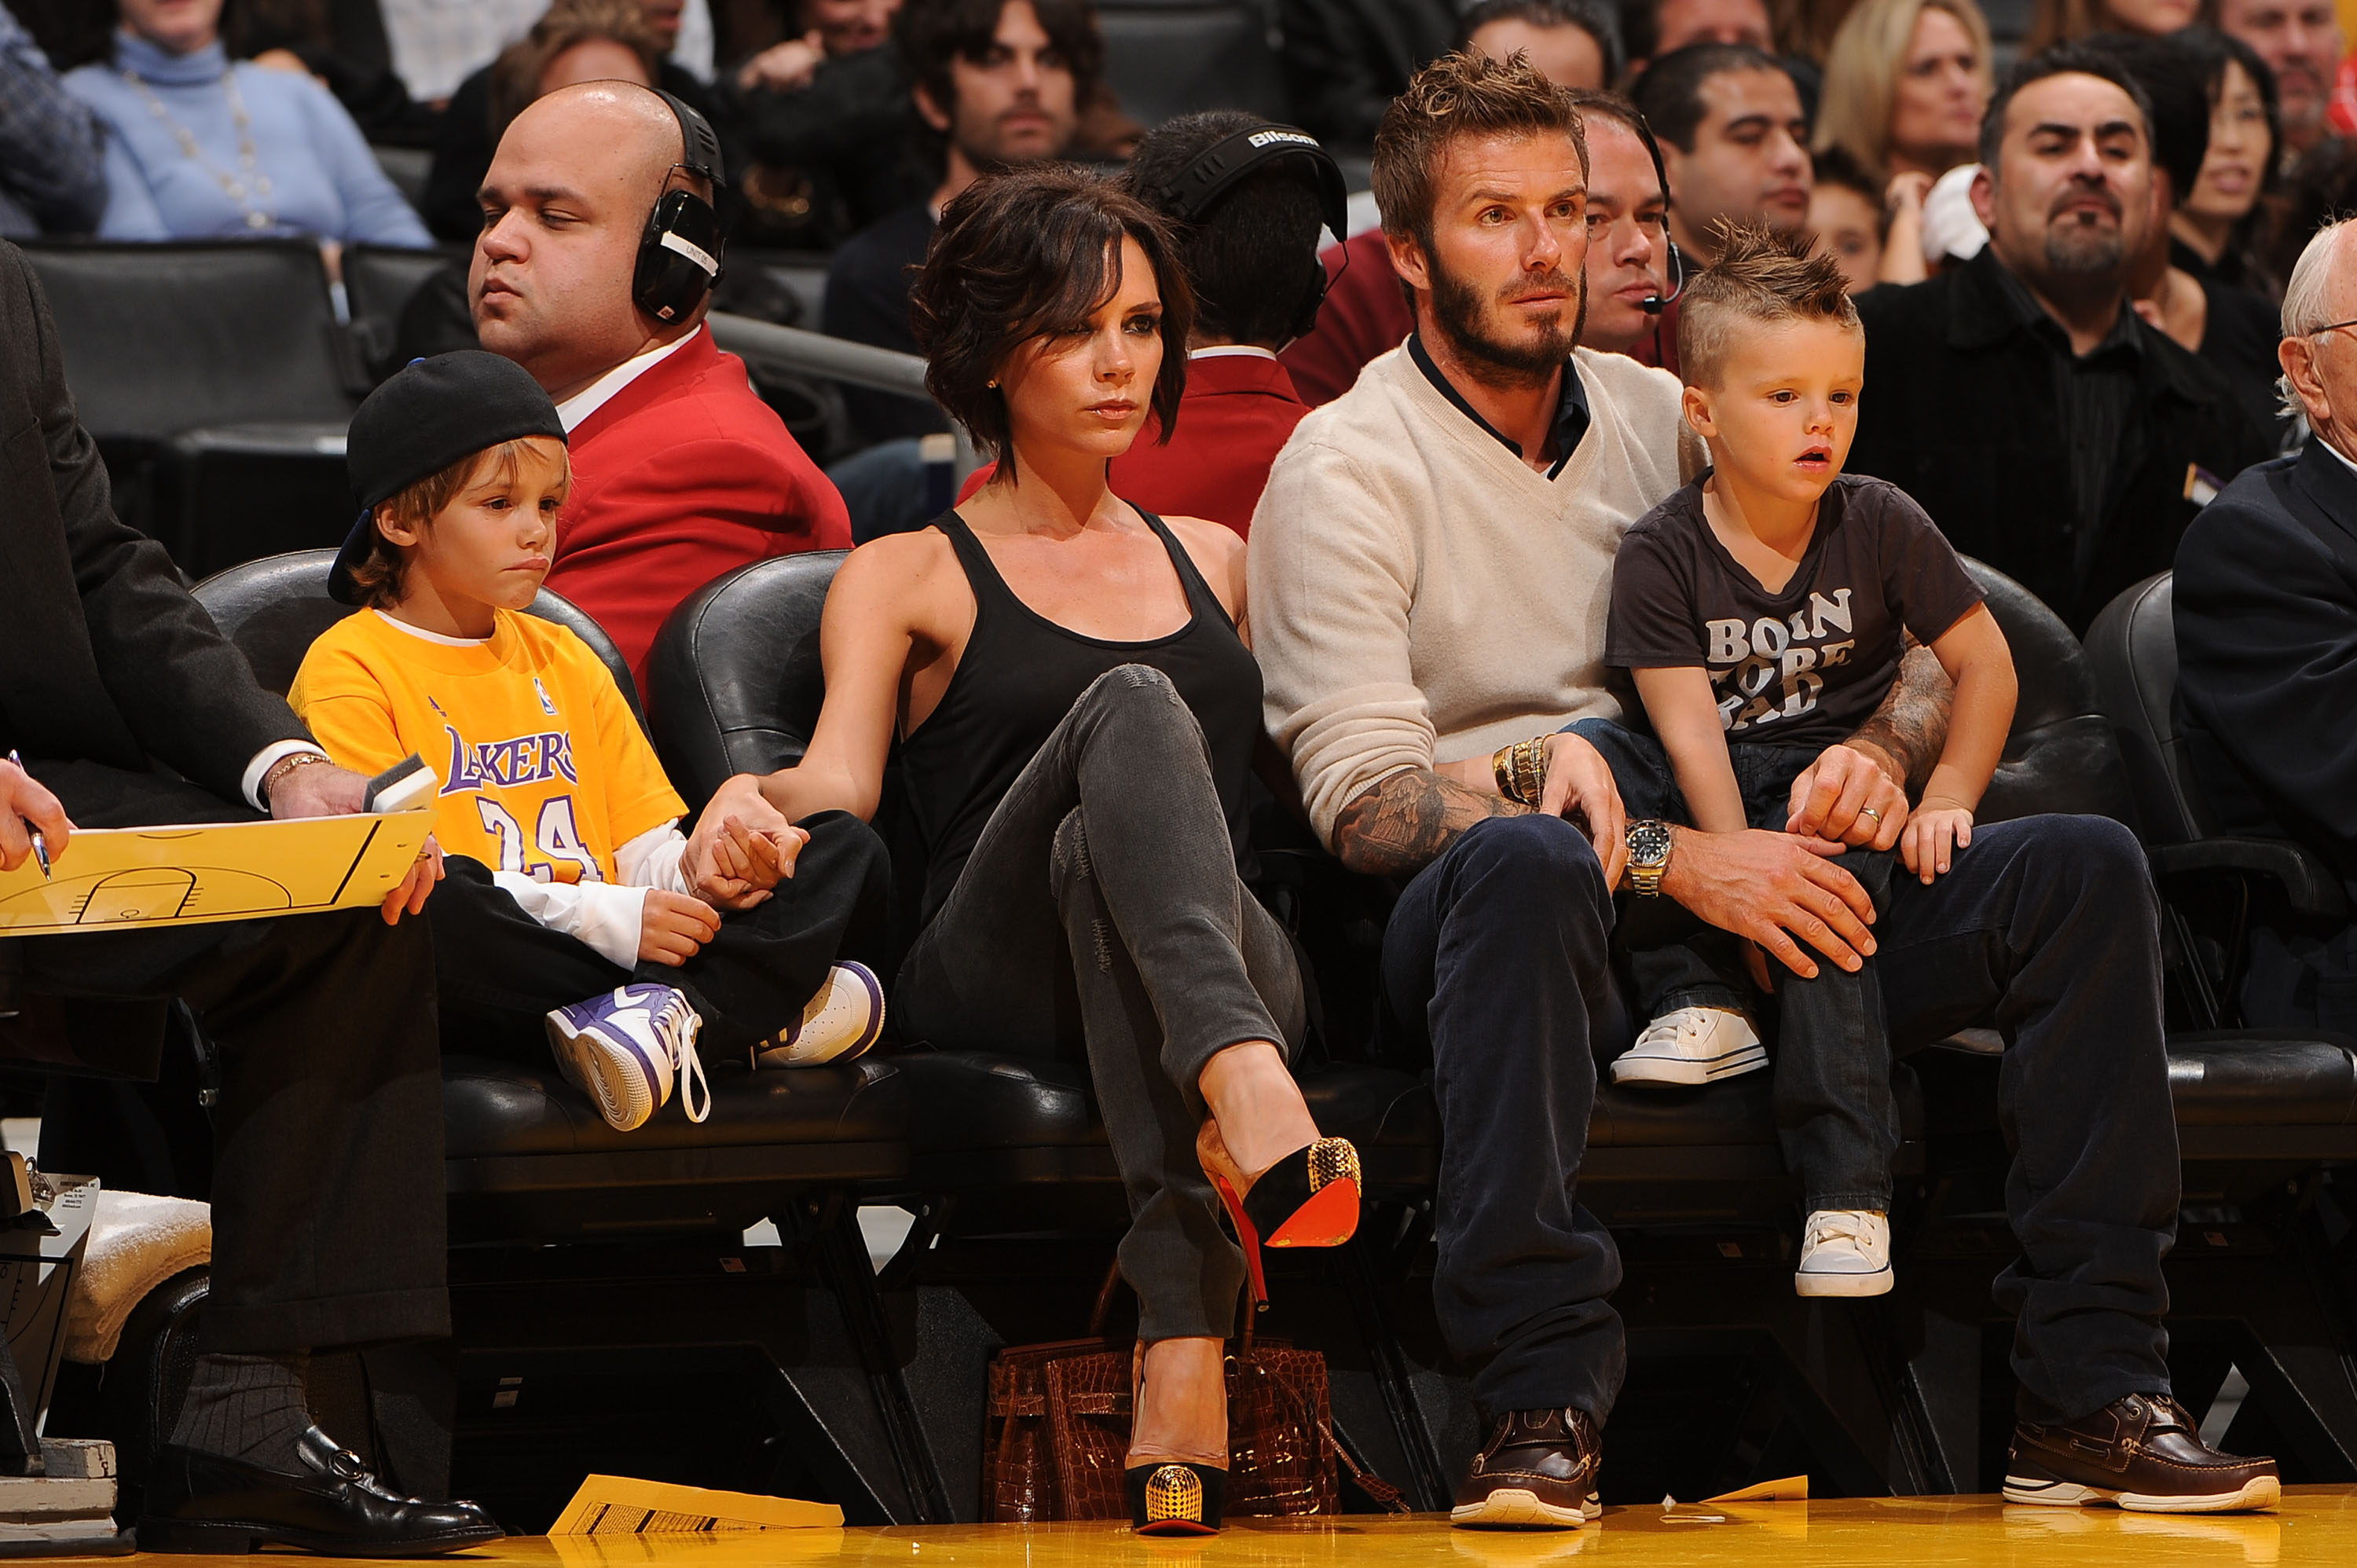 David and Victoria Beckham attend a game between the Dallas Mavericks and the Los Angeles Lakers with their children Romeo and Cruz at Staples Center on October 30, 2009 in Los Angeles, California | Source: Getty Images